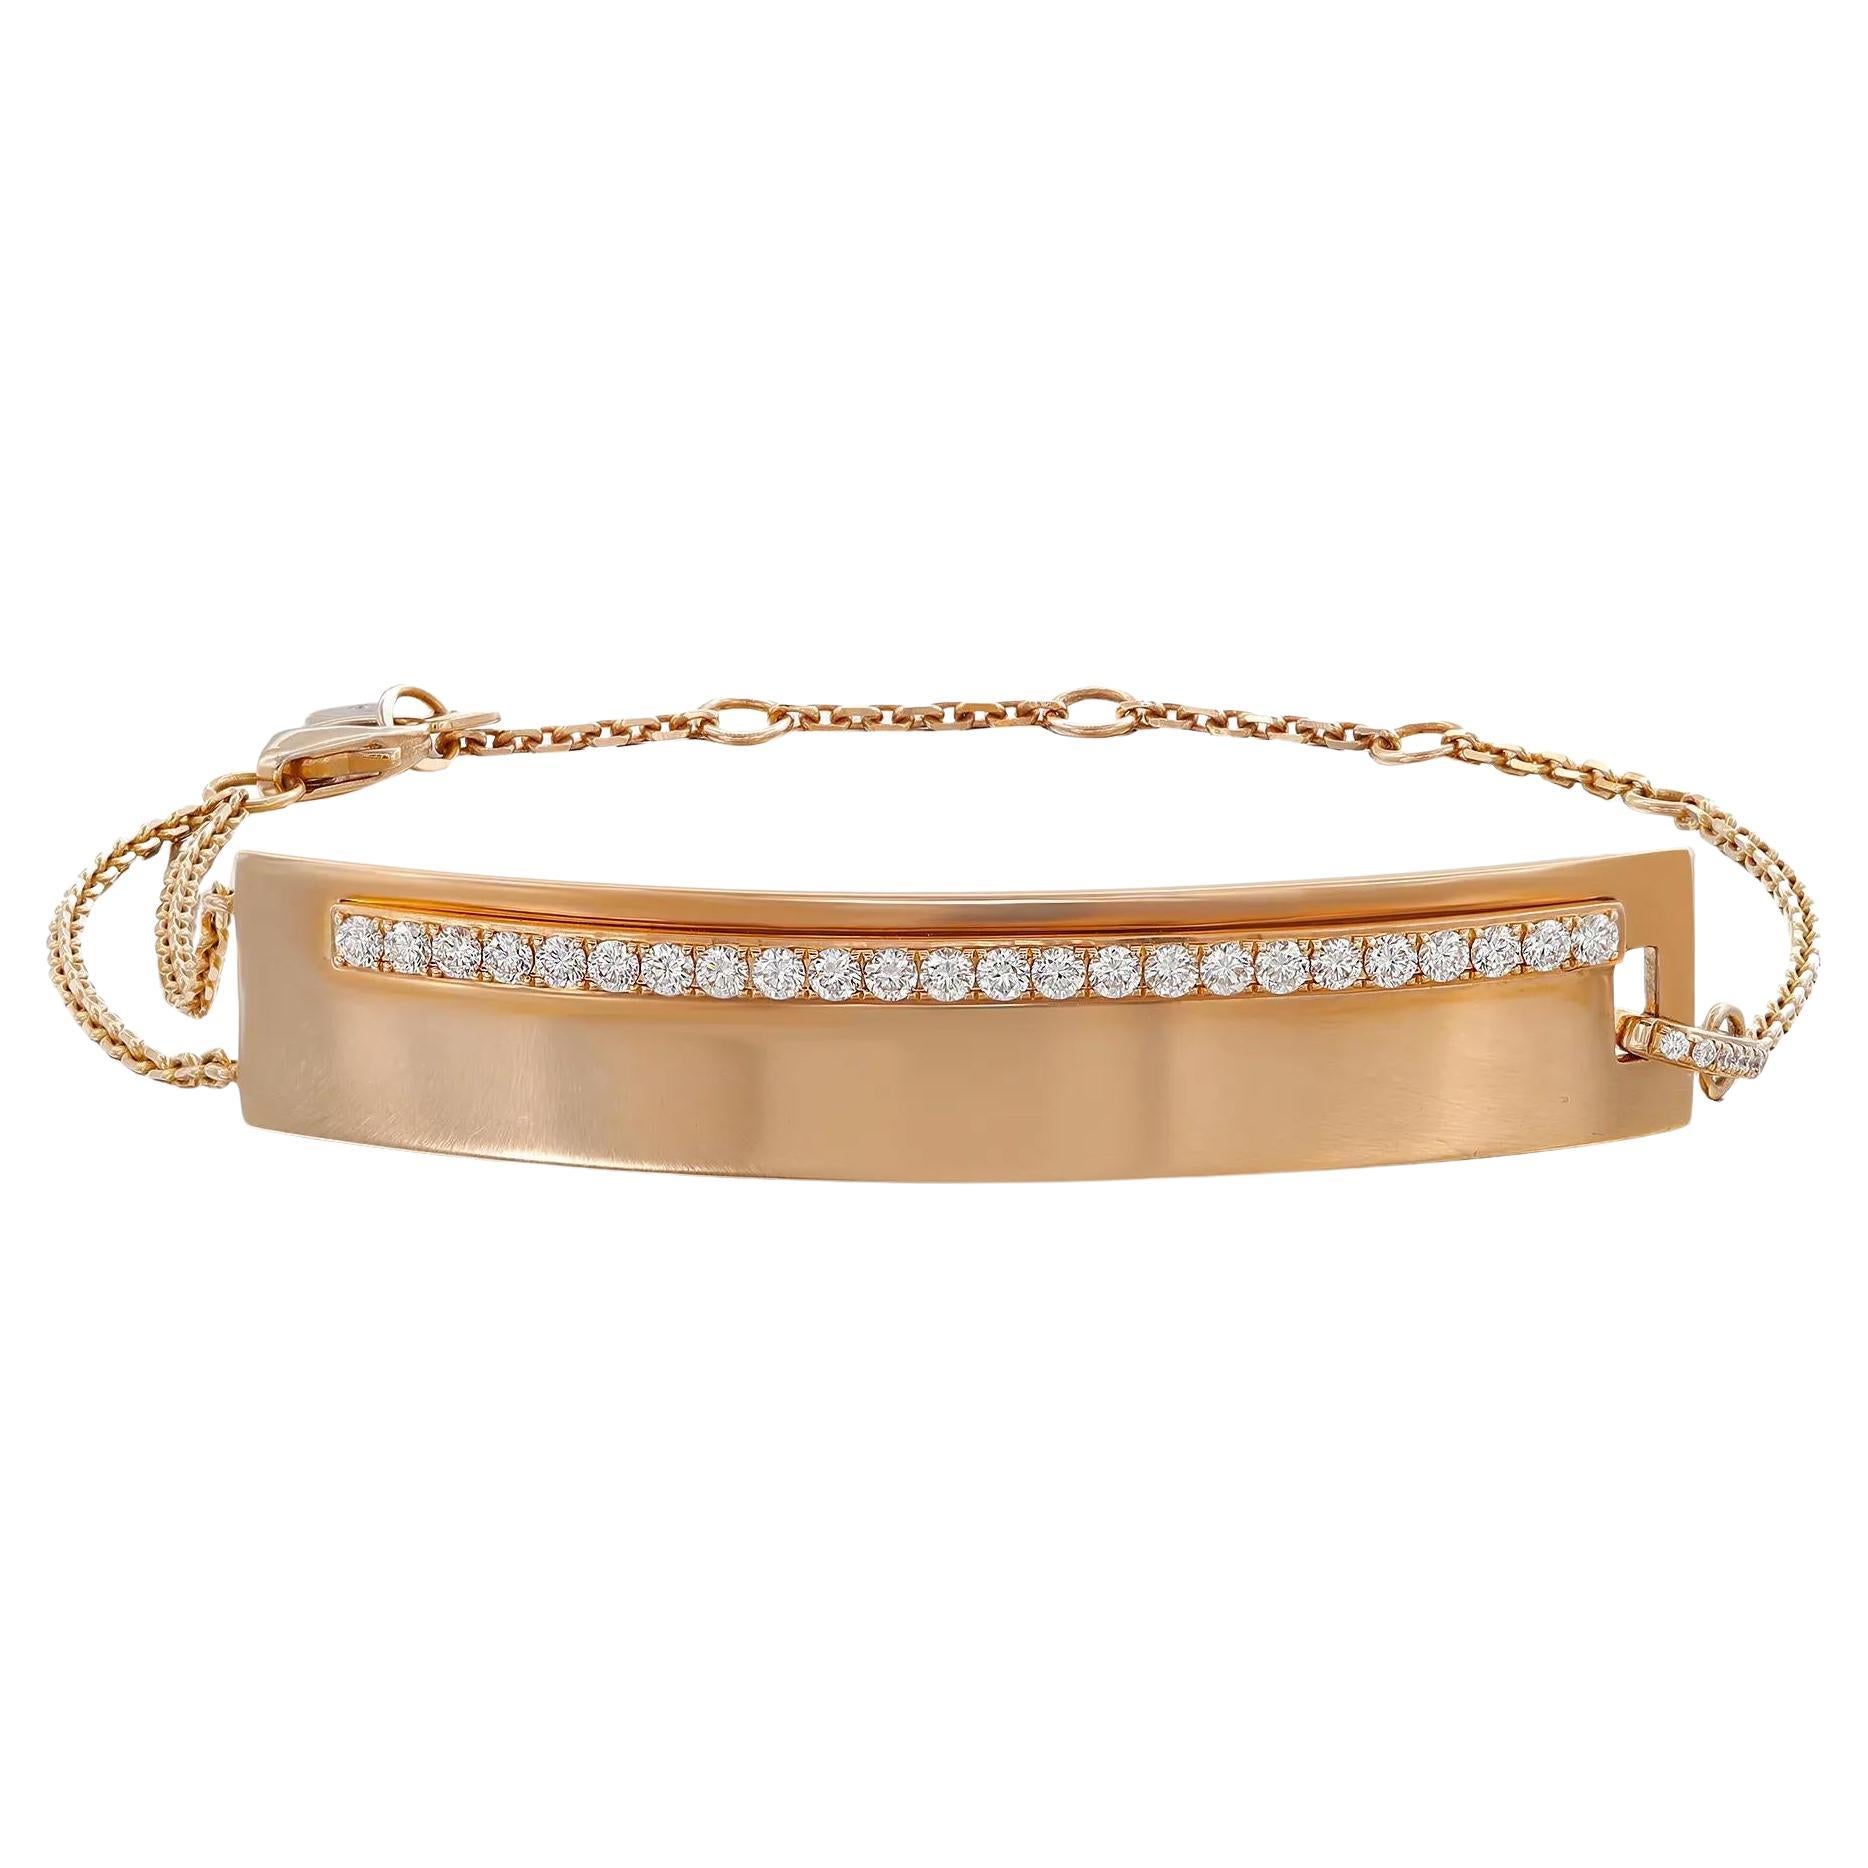 Messika 0.44Cttw Kate Diamond Chain Bracelet 18K Rose Gold 7.5 Inches